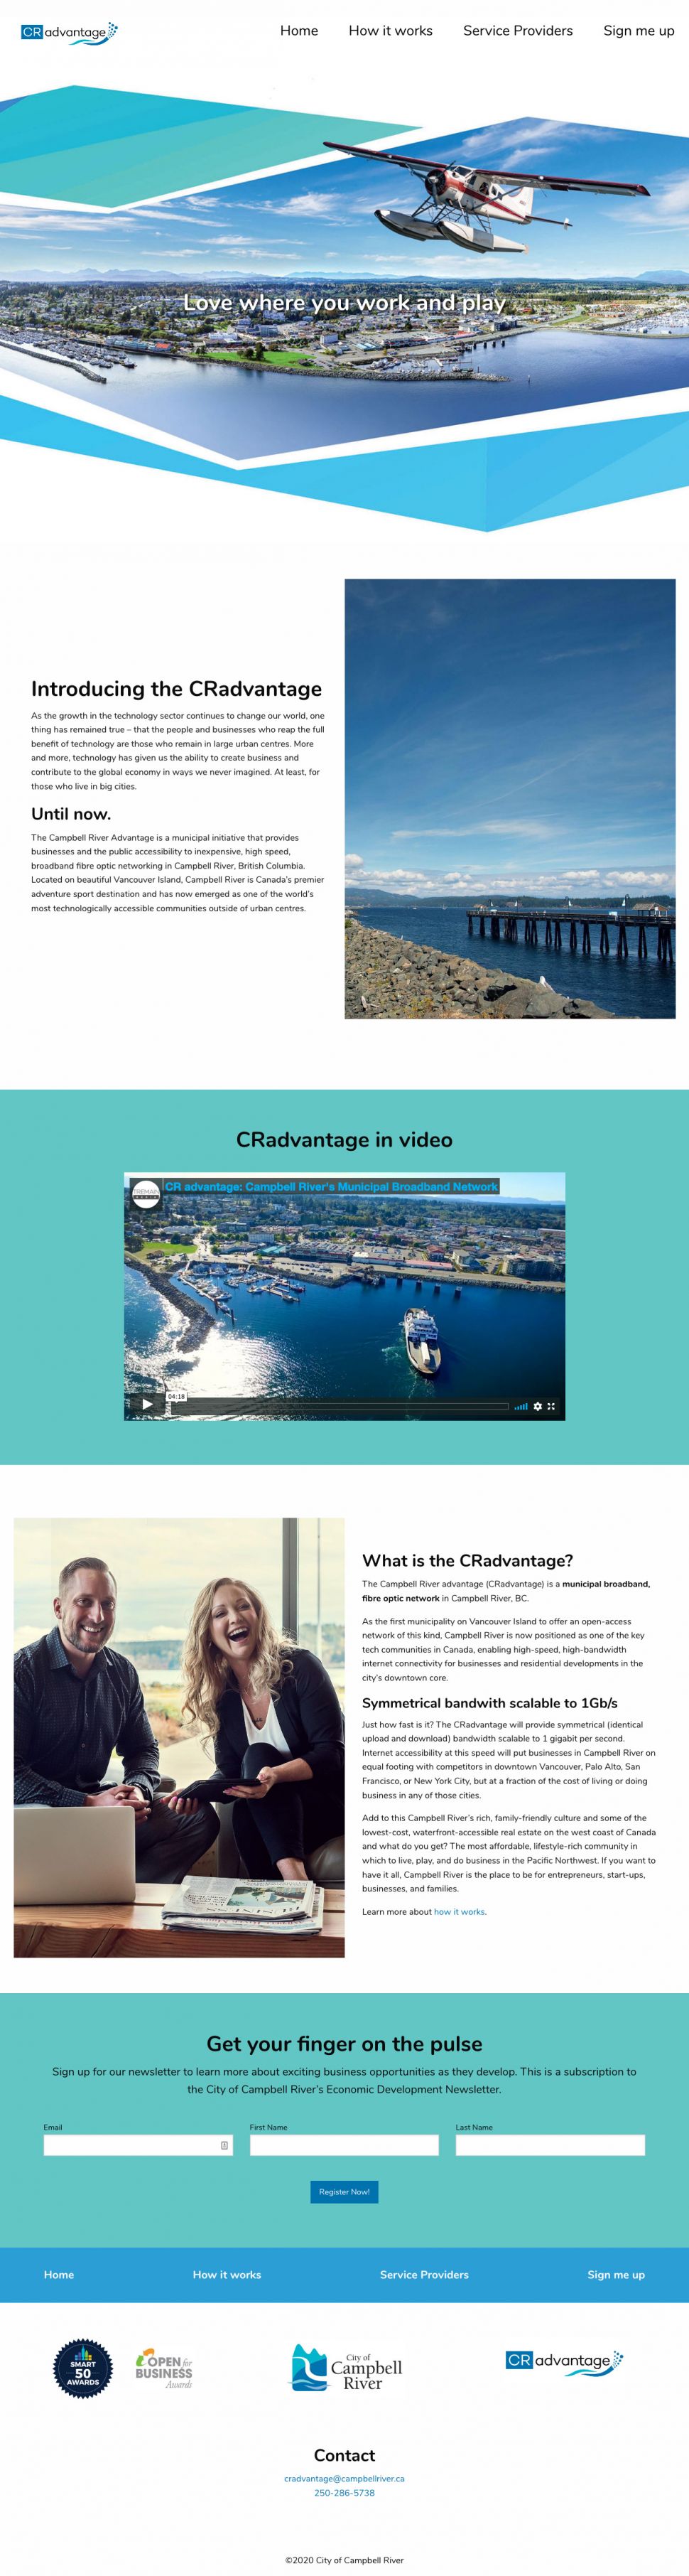 Screenshot of CRadvantage - City of Campbell River website home page.